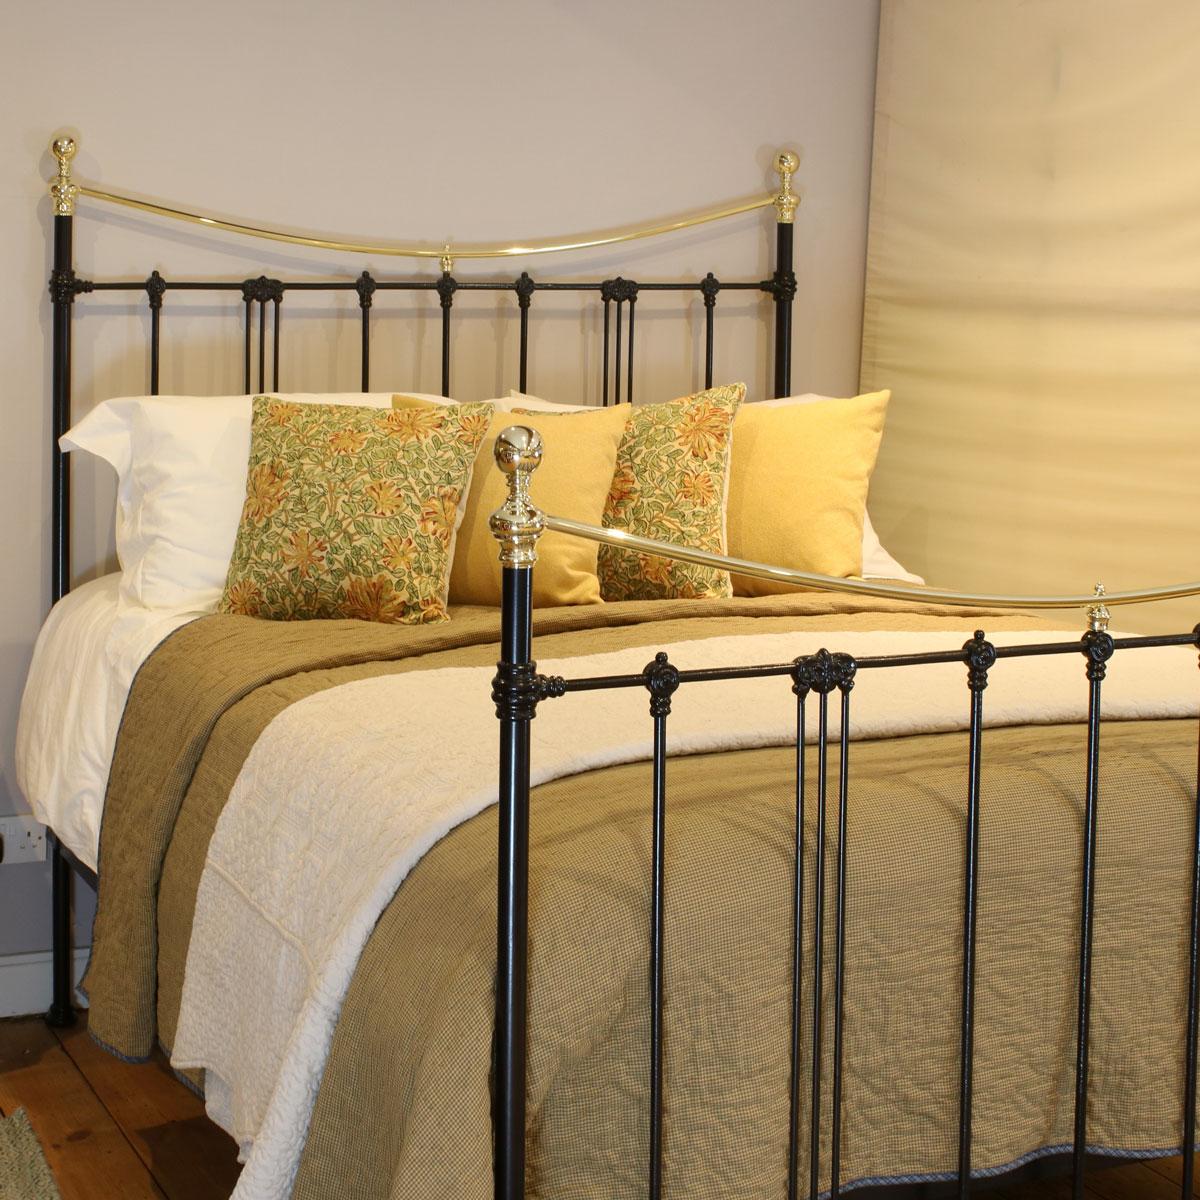 Victorian cast iron and brass bedstead in black with 'Art Nouveau' decoration and curved brass top rails. 

This bed accepts a UK King size or US Queen size (5ft, 60in or 150cm wide) base and mattress set.

The price includes a standard firm bed